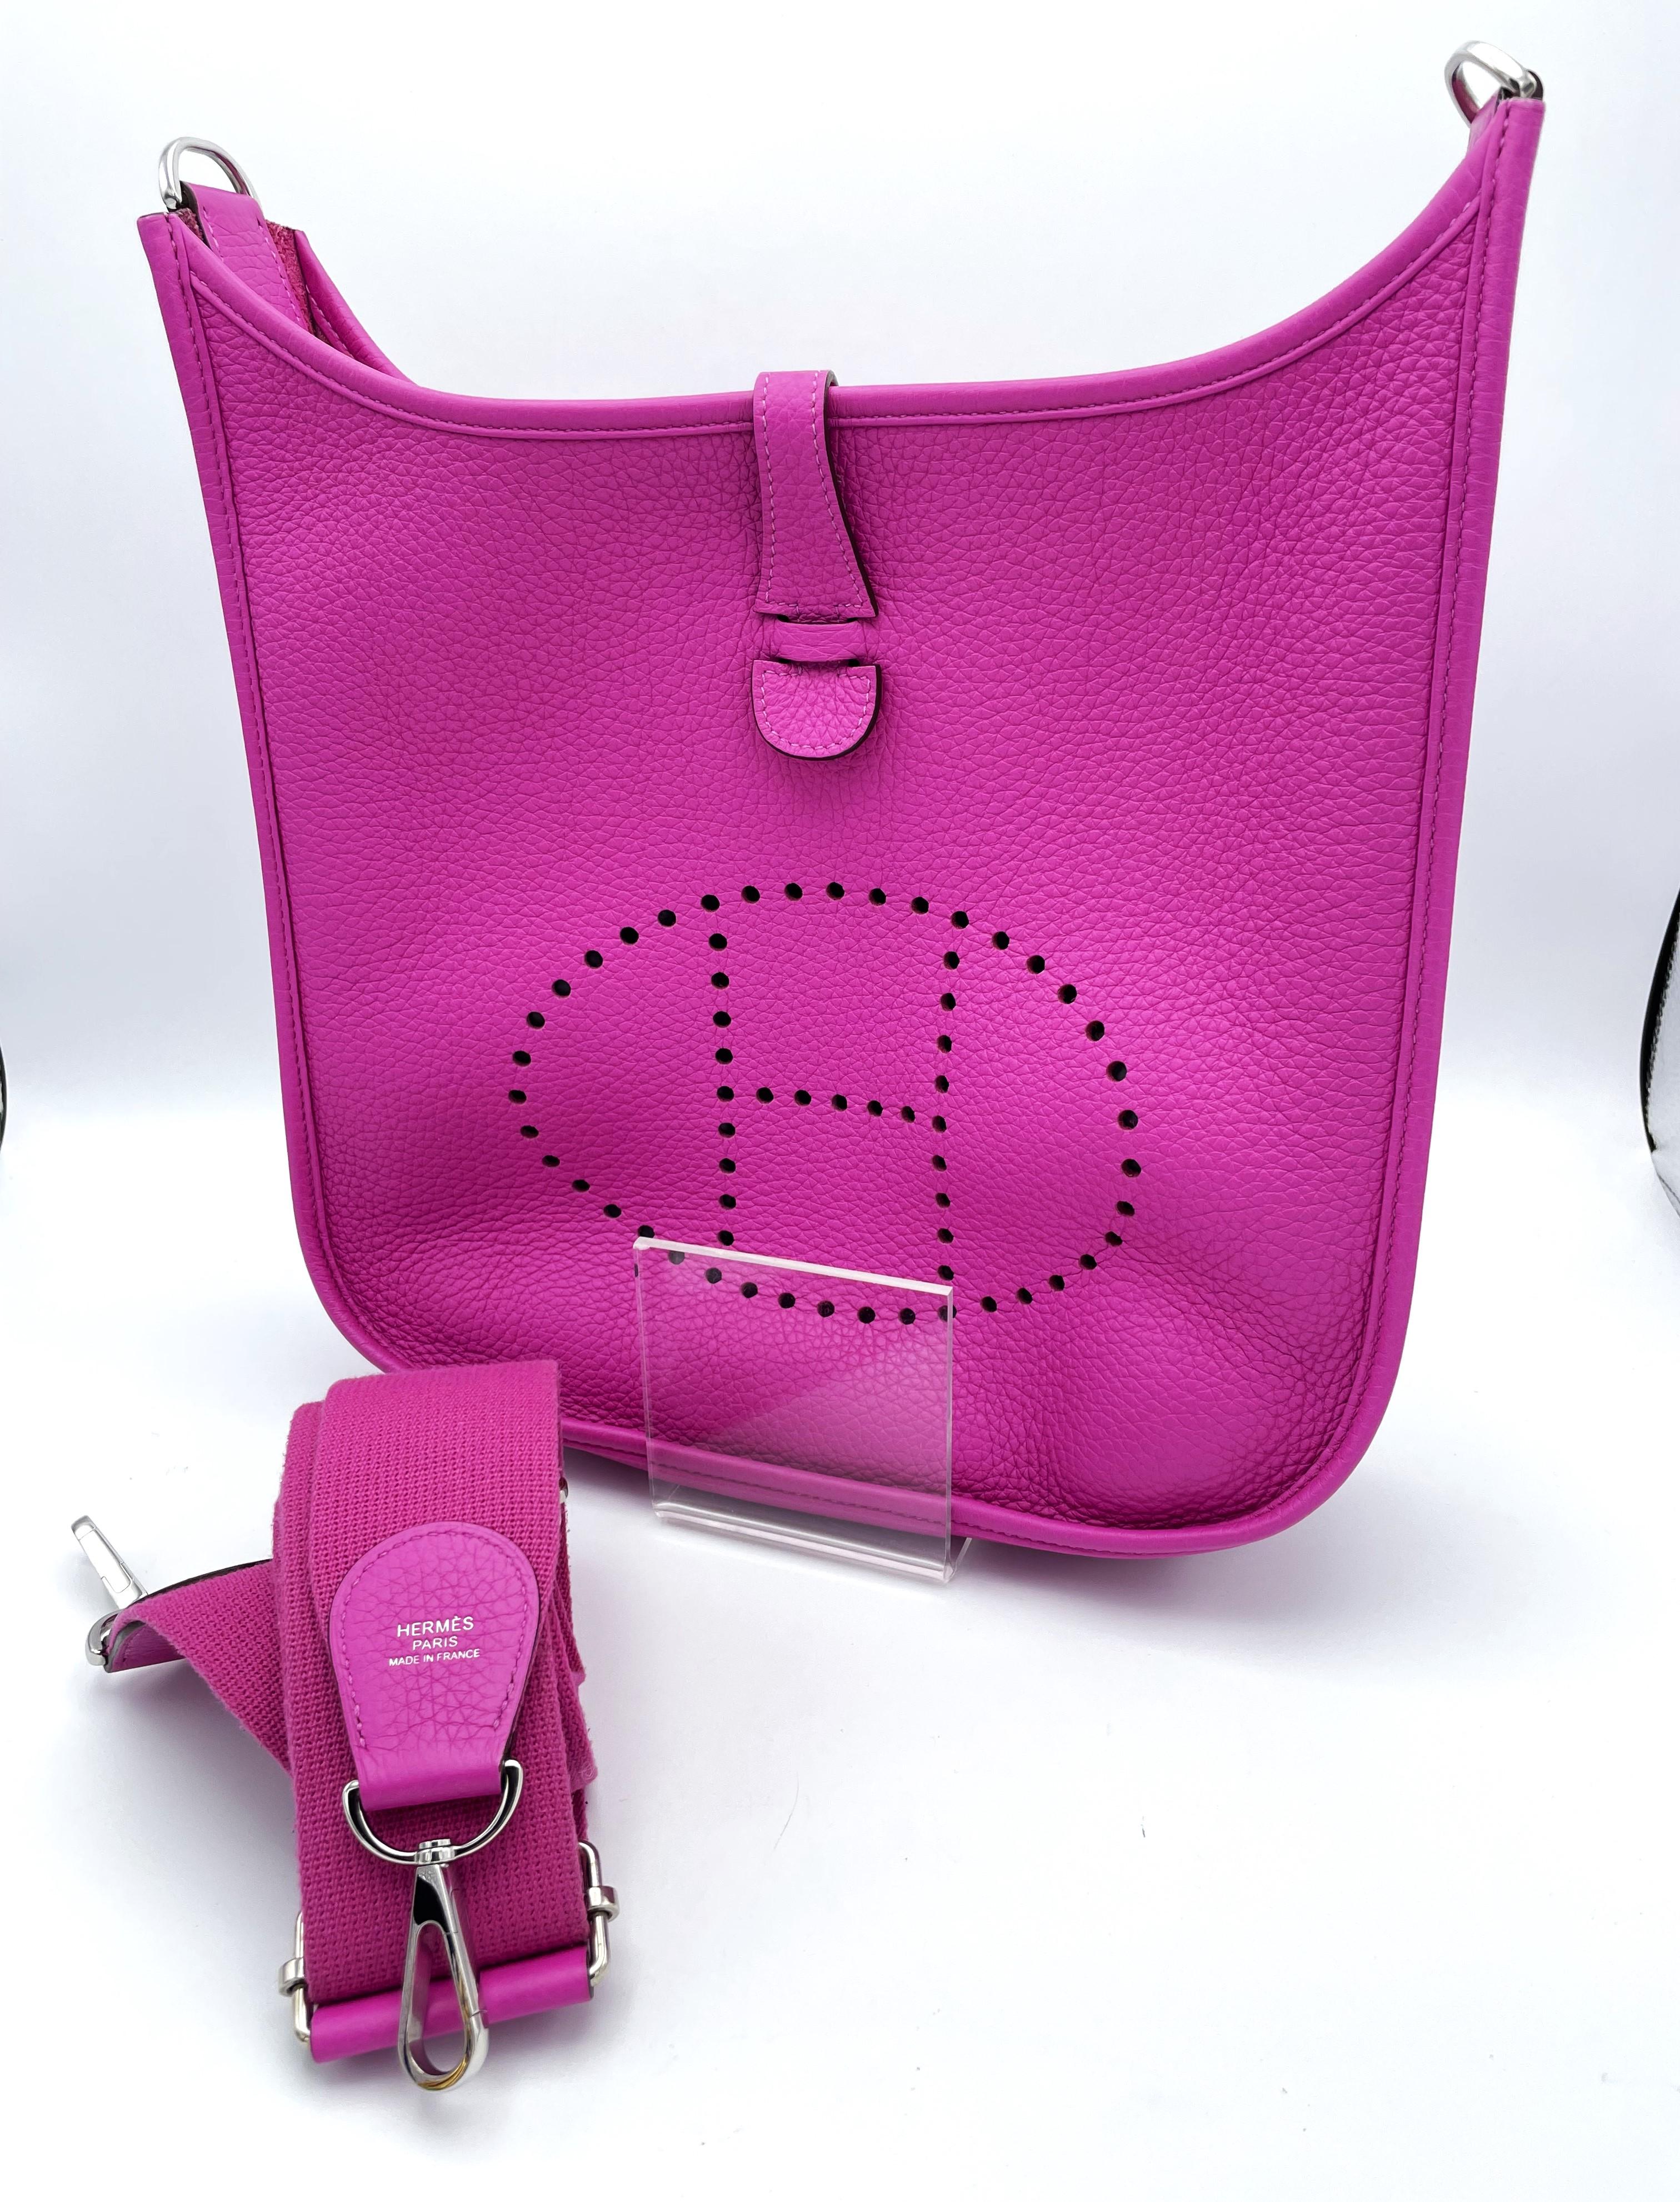 This is the iconic EVELYNE III PM 'workhorse' shoulder bag in absolutely stunning pink Clemence leather and featuring paladium hardware.
The bag comes with a long shoulder strap in pink from 94 cm to 136 cm long x 4 cm wide and in the original